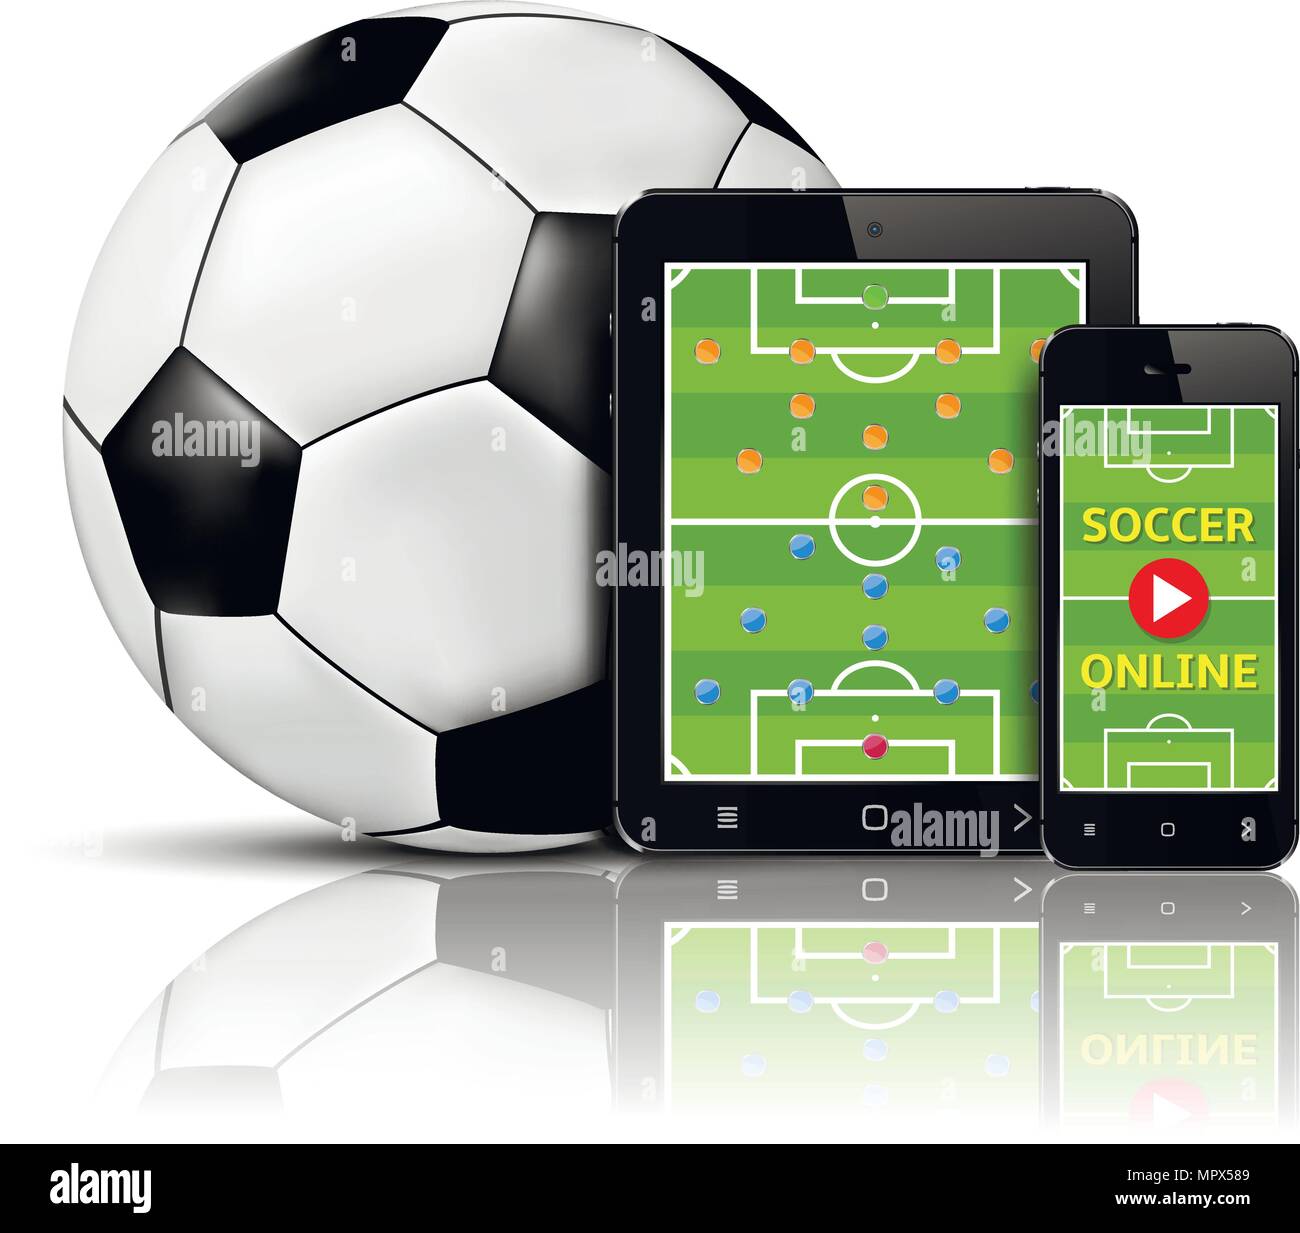 Live soccer online on mobile phone and tablet with team formation